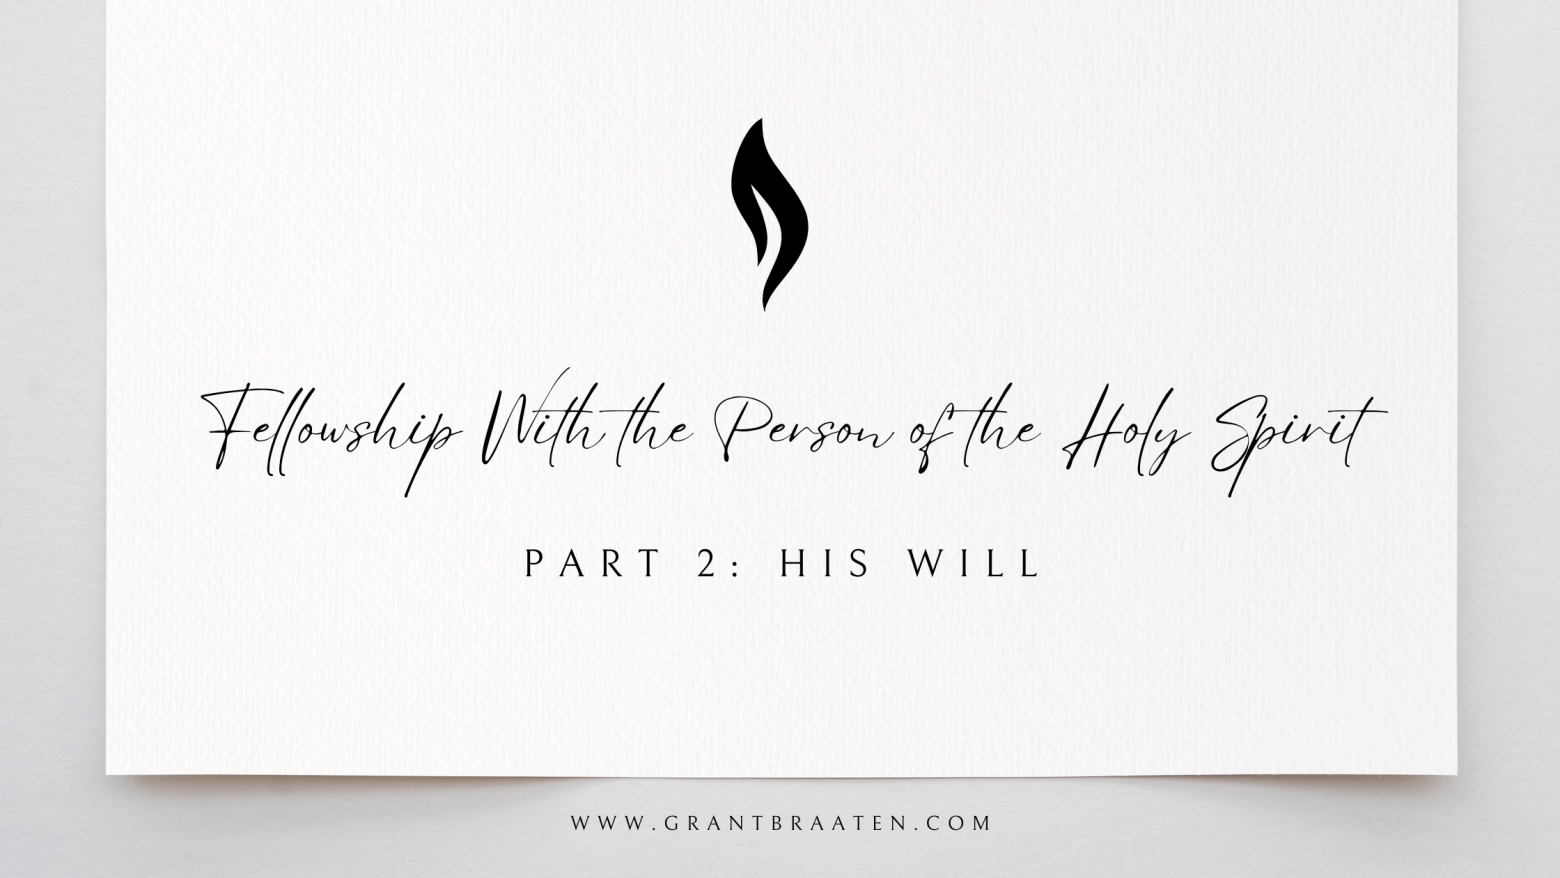 The Holy Spirit’s Will: Fellowship With The Person of the Holy Spirit – Pt. 2